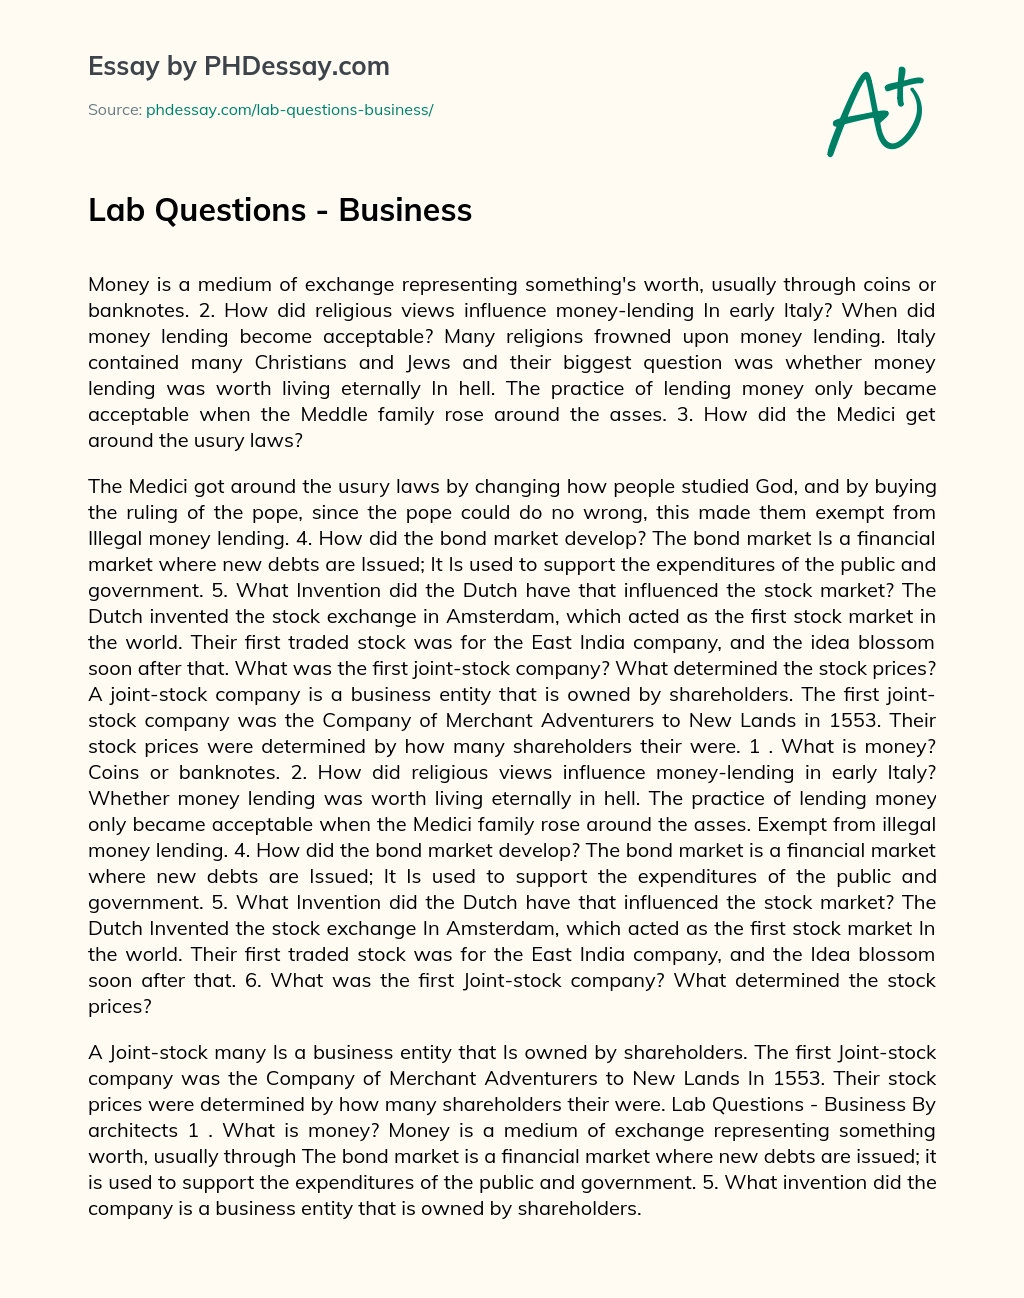 Lab Questions – Business essay